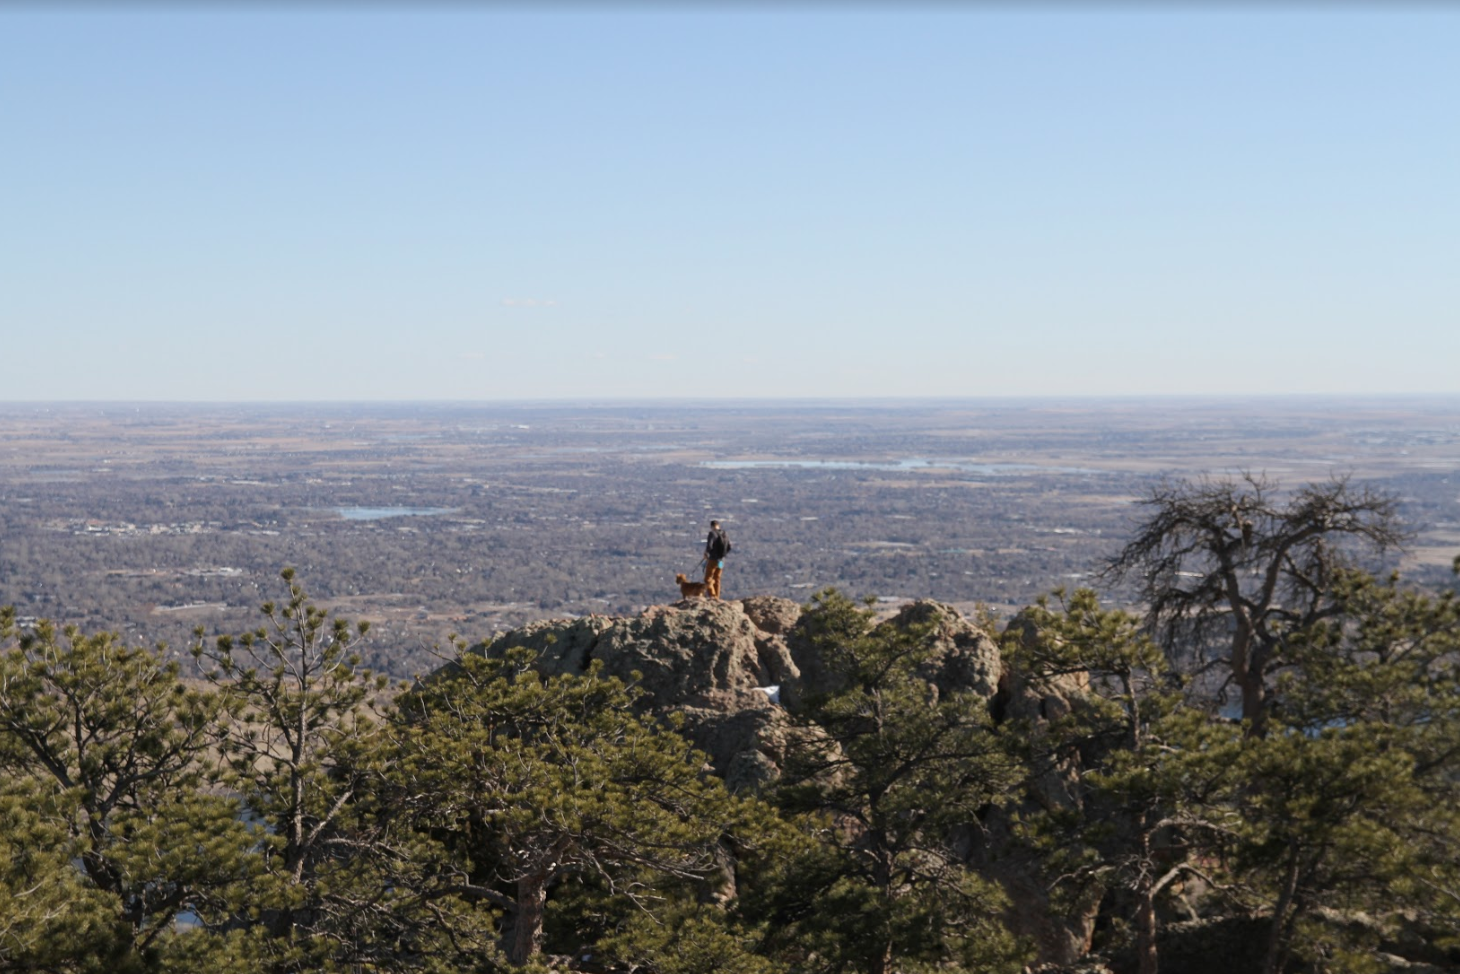 Hiking Arthur’s Rock – A Quick And Beautiful Fort Collins Hike